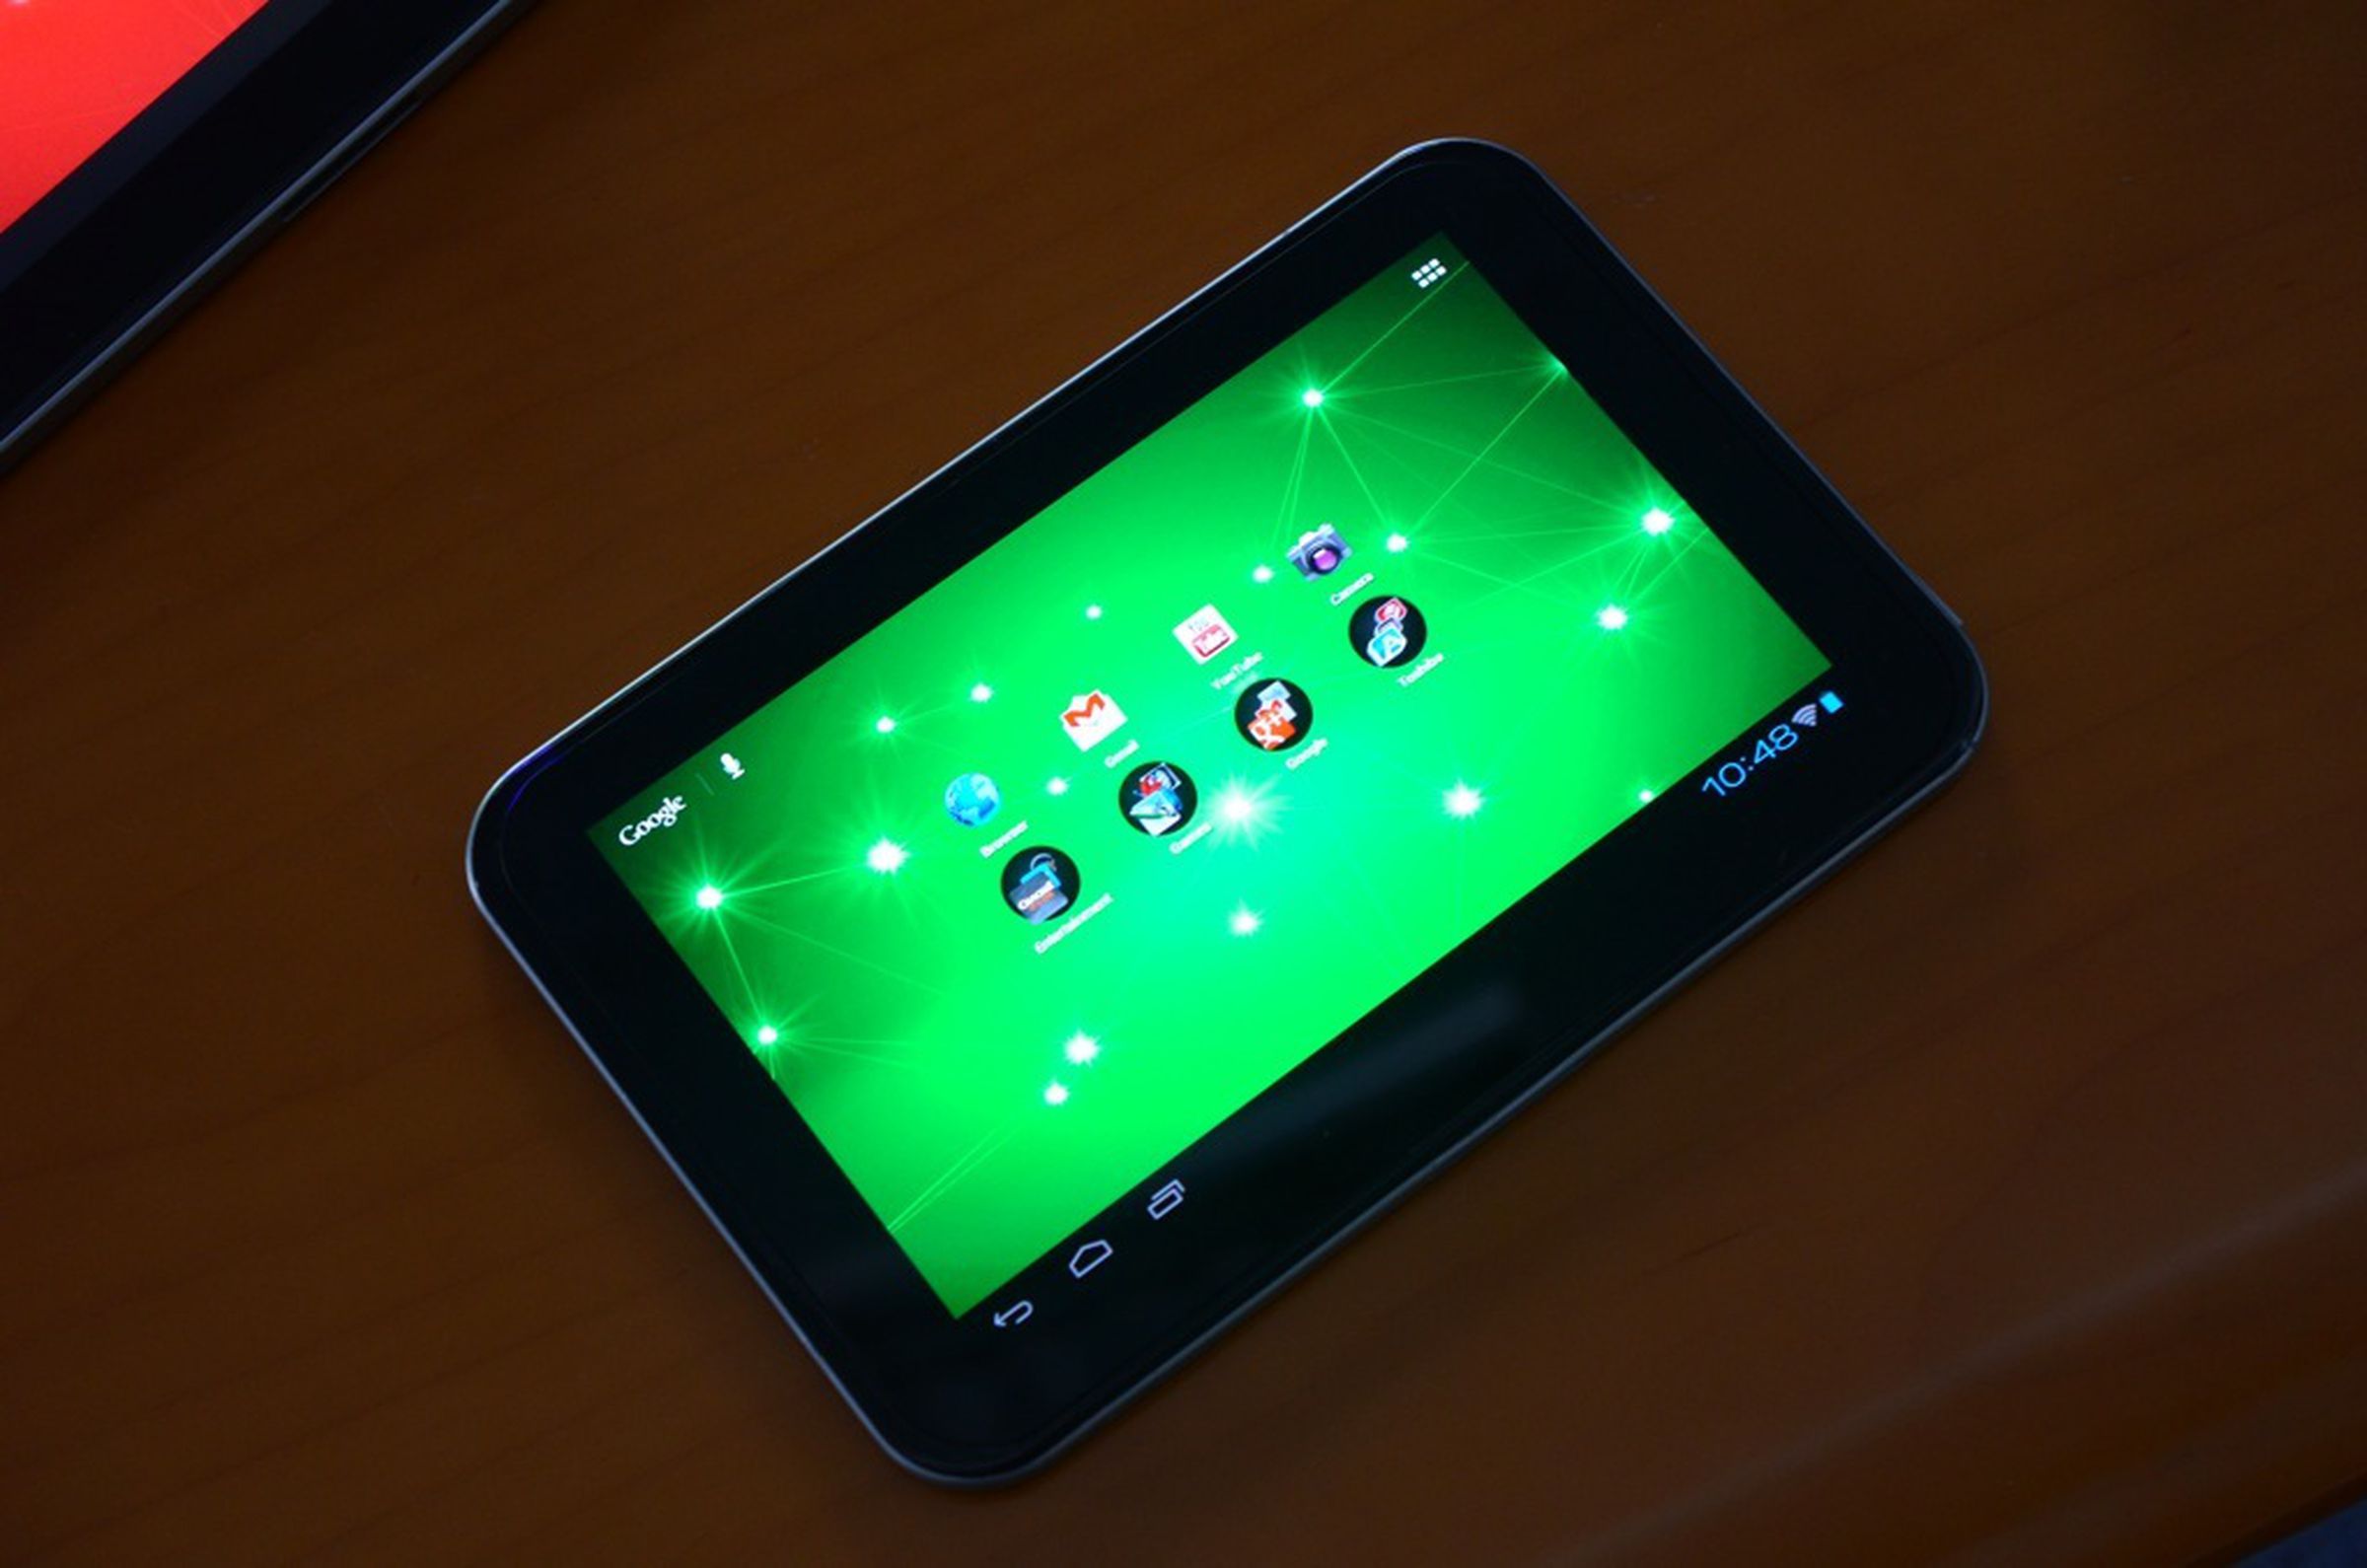 Toshiba Excite 7.7, Excite 10, and Excite 13 pictures